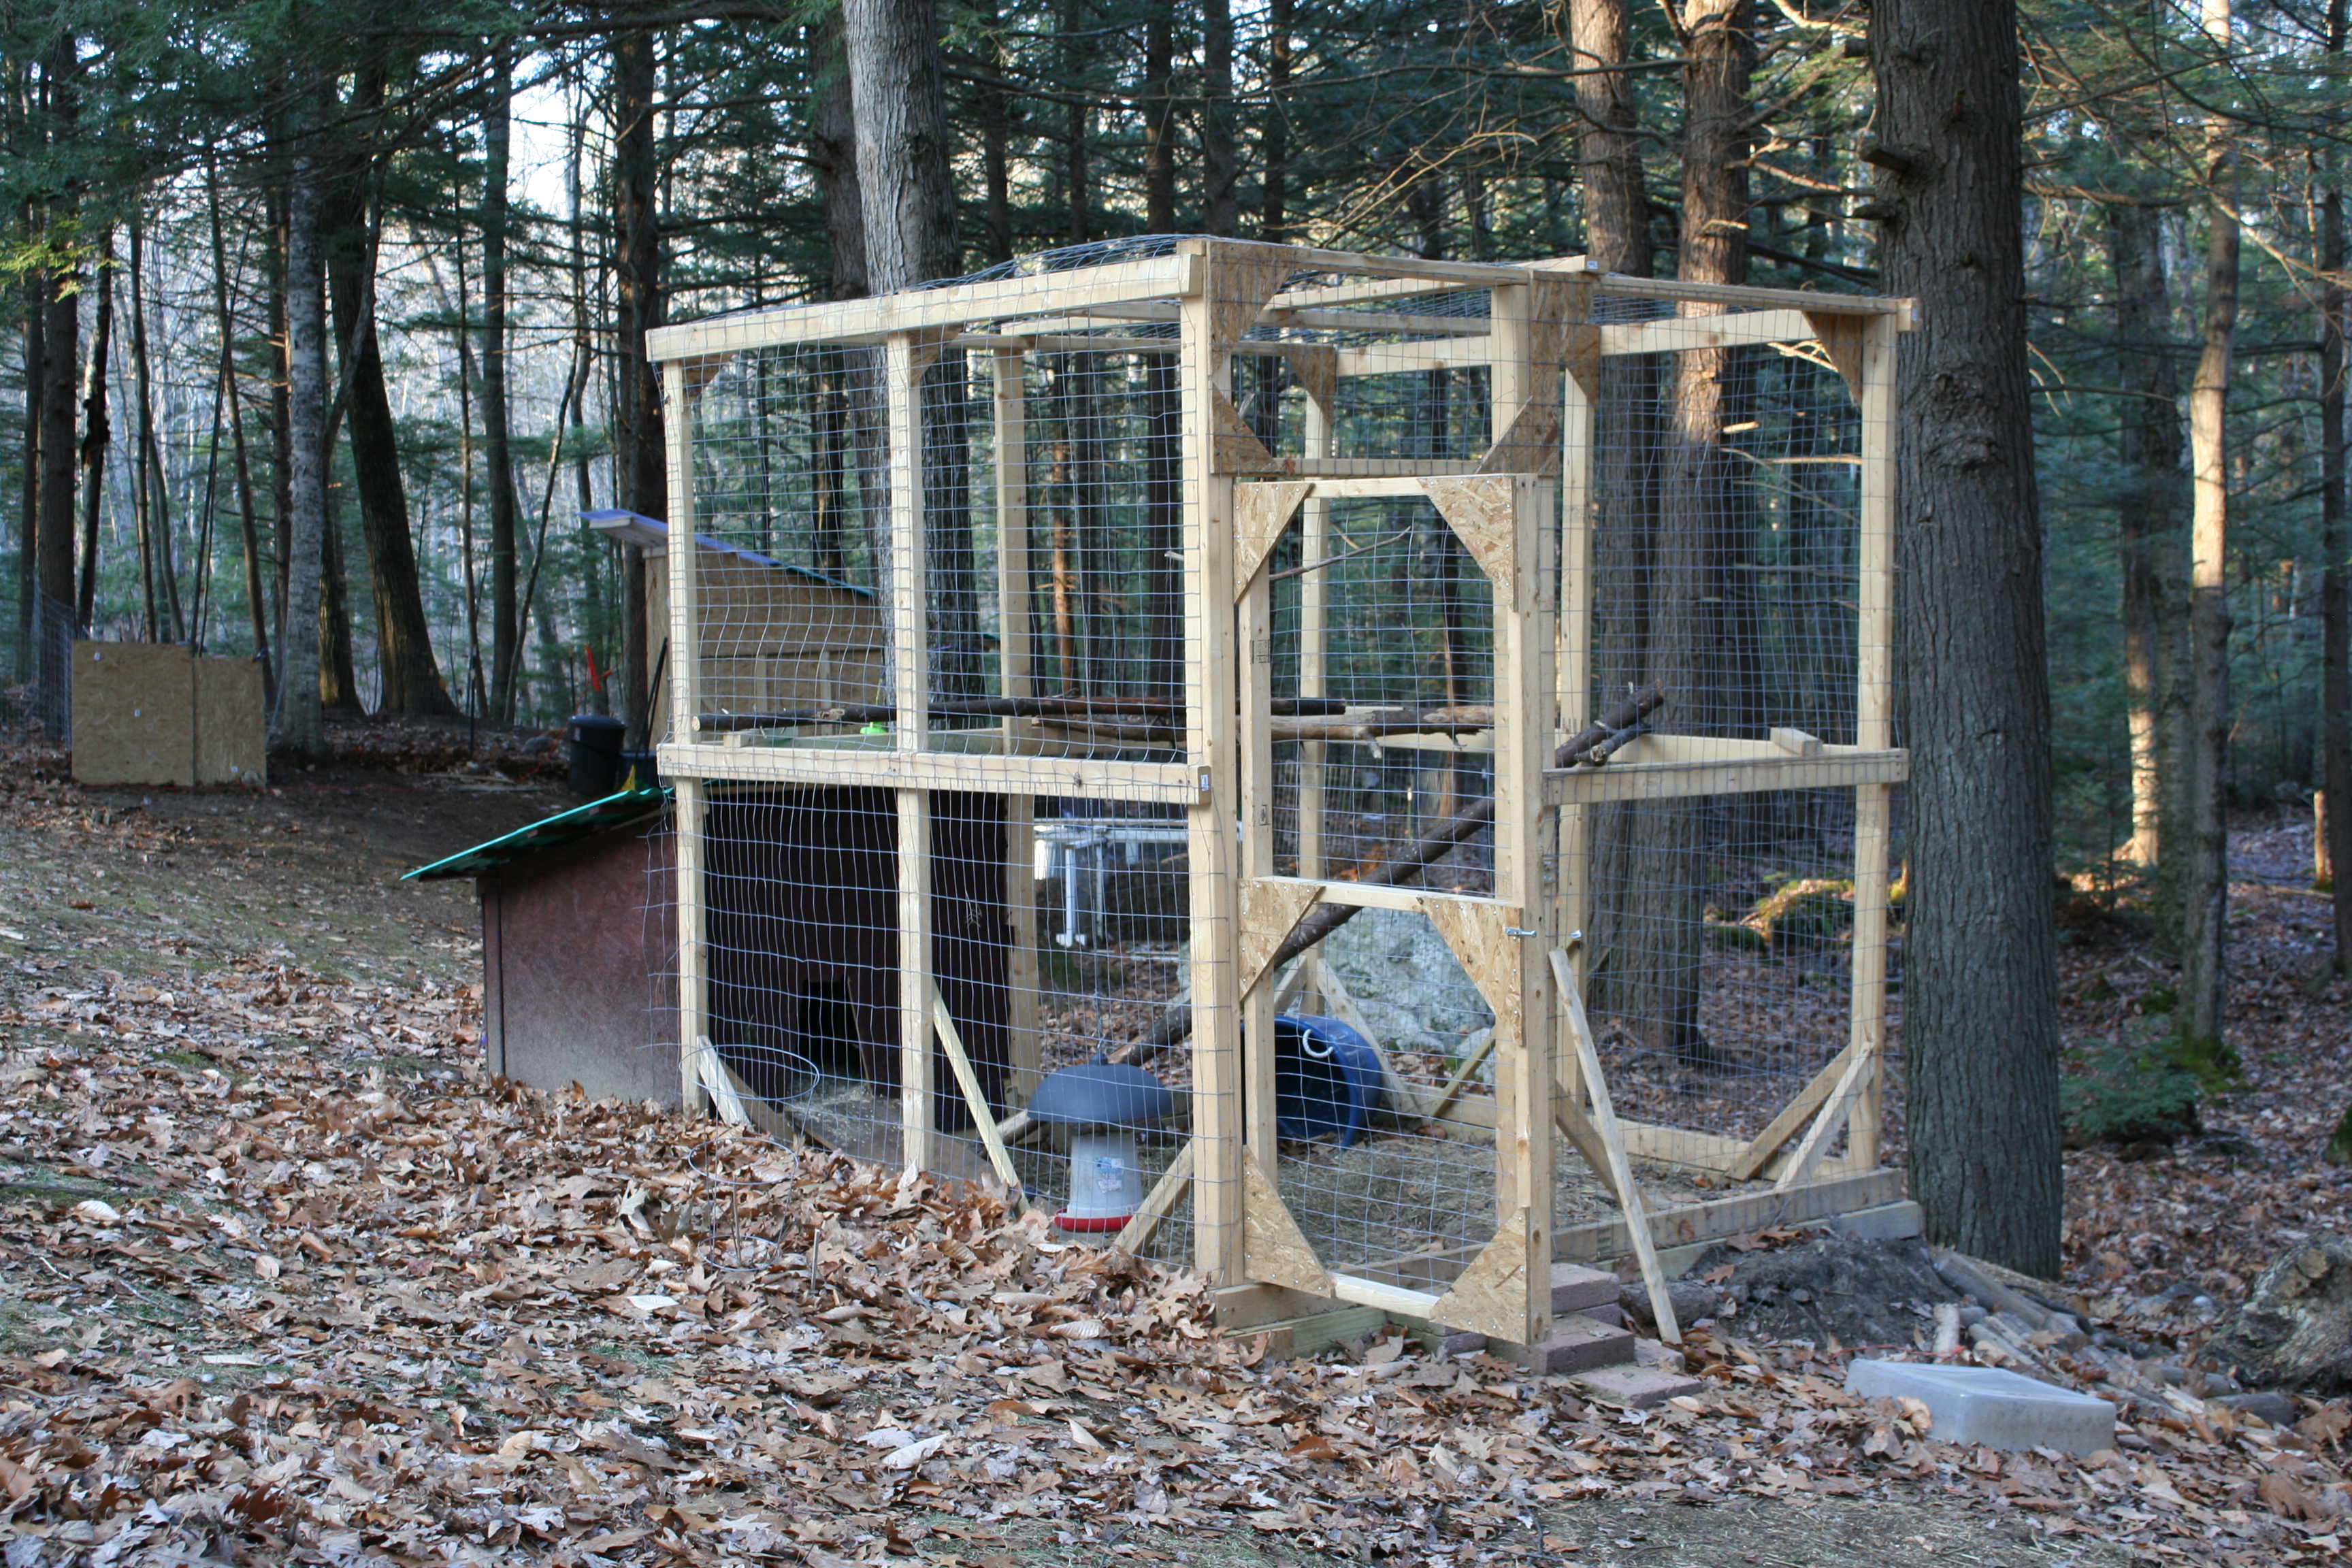 The duck hut for our muscovy ducks, including the attached pen.  The hut is 4' x 8' and the pen is 8' x 8' x 8'.  There are branches in the pen for roosting.  They're rarely locked in, but it's there if they want it in bad weather, the crumbles go in the feeder, and we used it to keep our drake contained when he got injured.